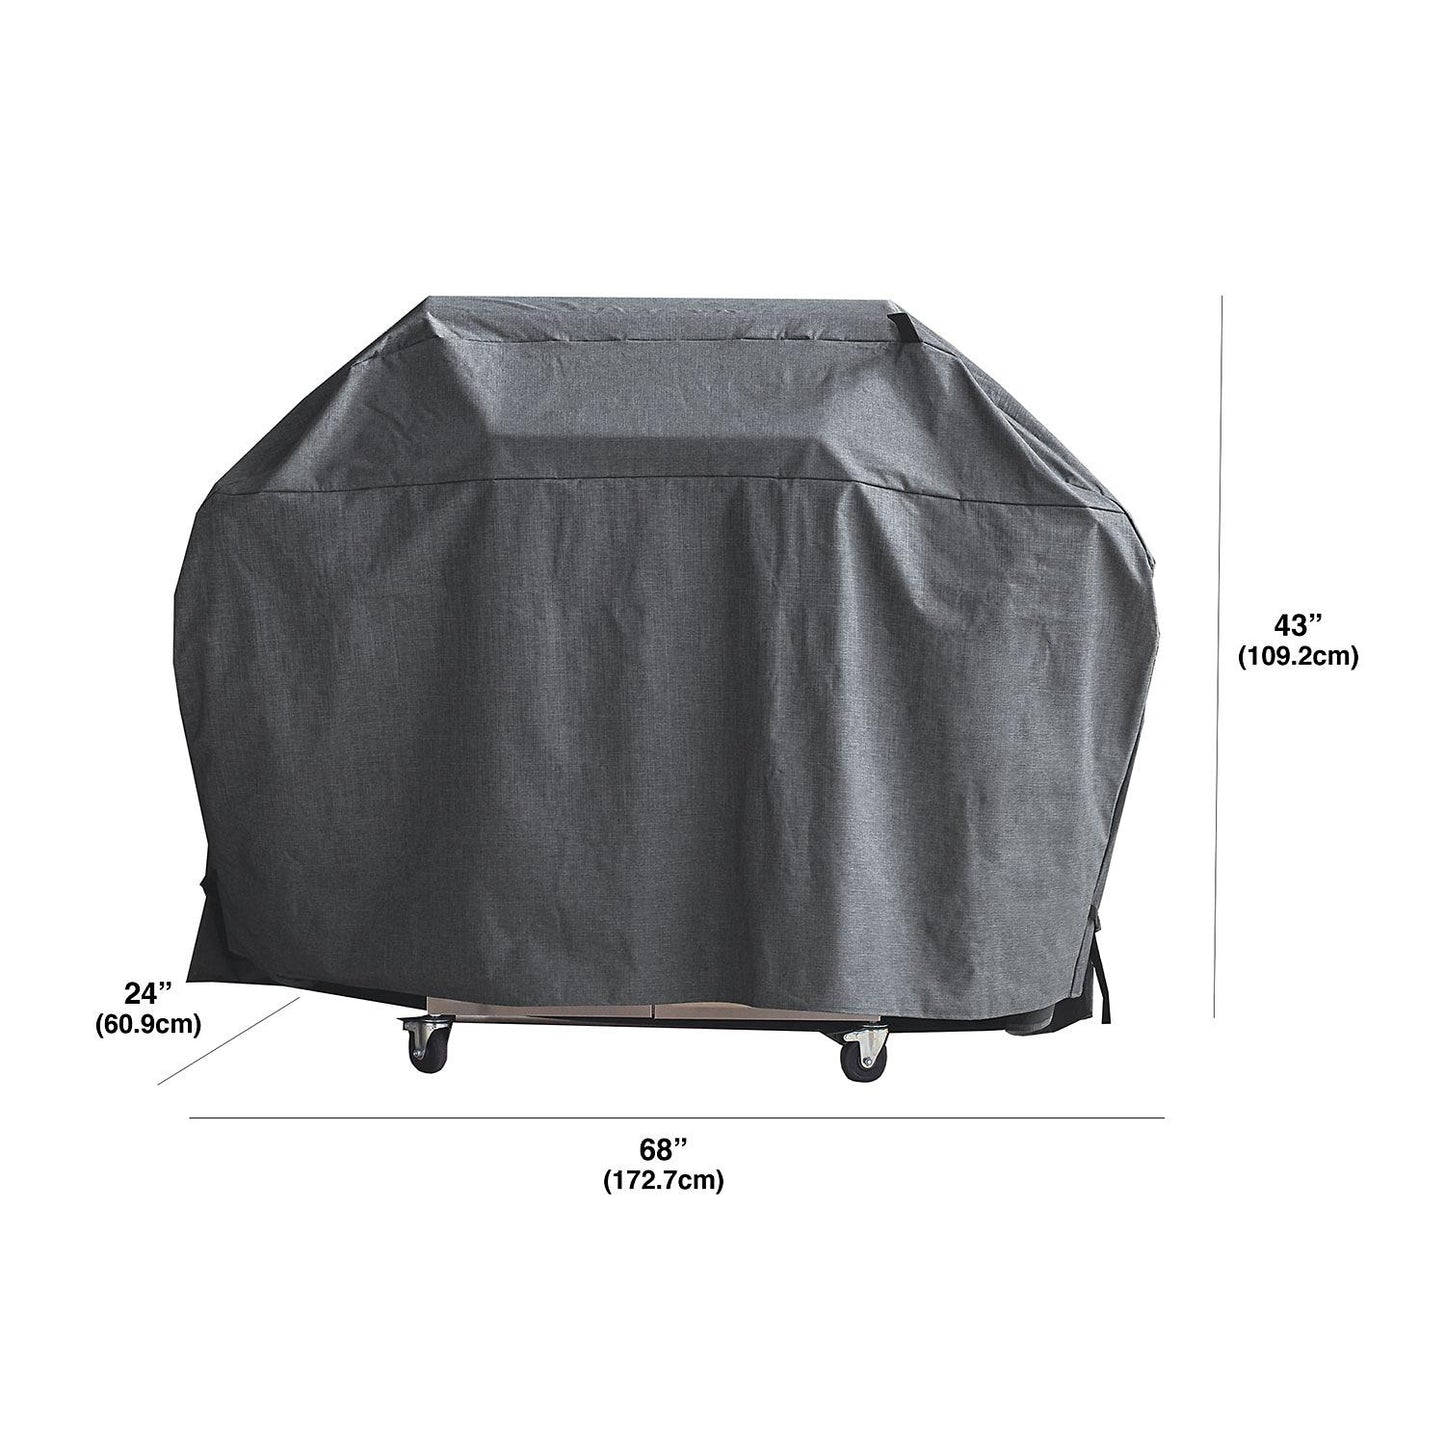 Weather-Resistant Grill Cover 9969, Fits 68" Grills